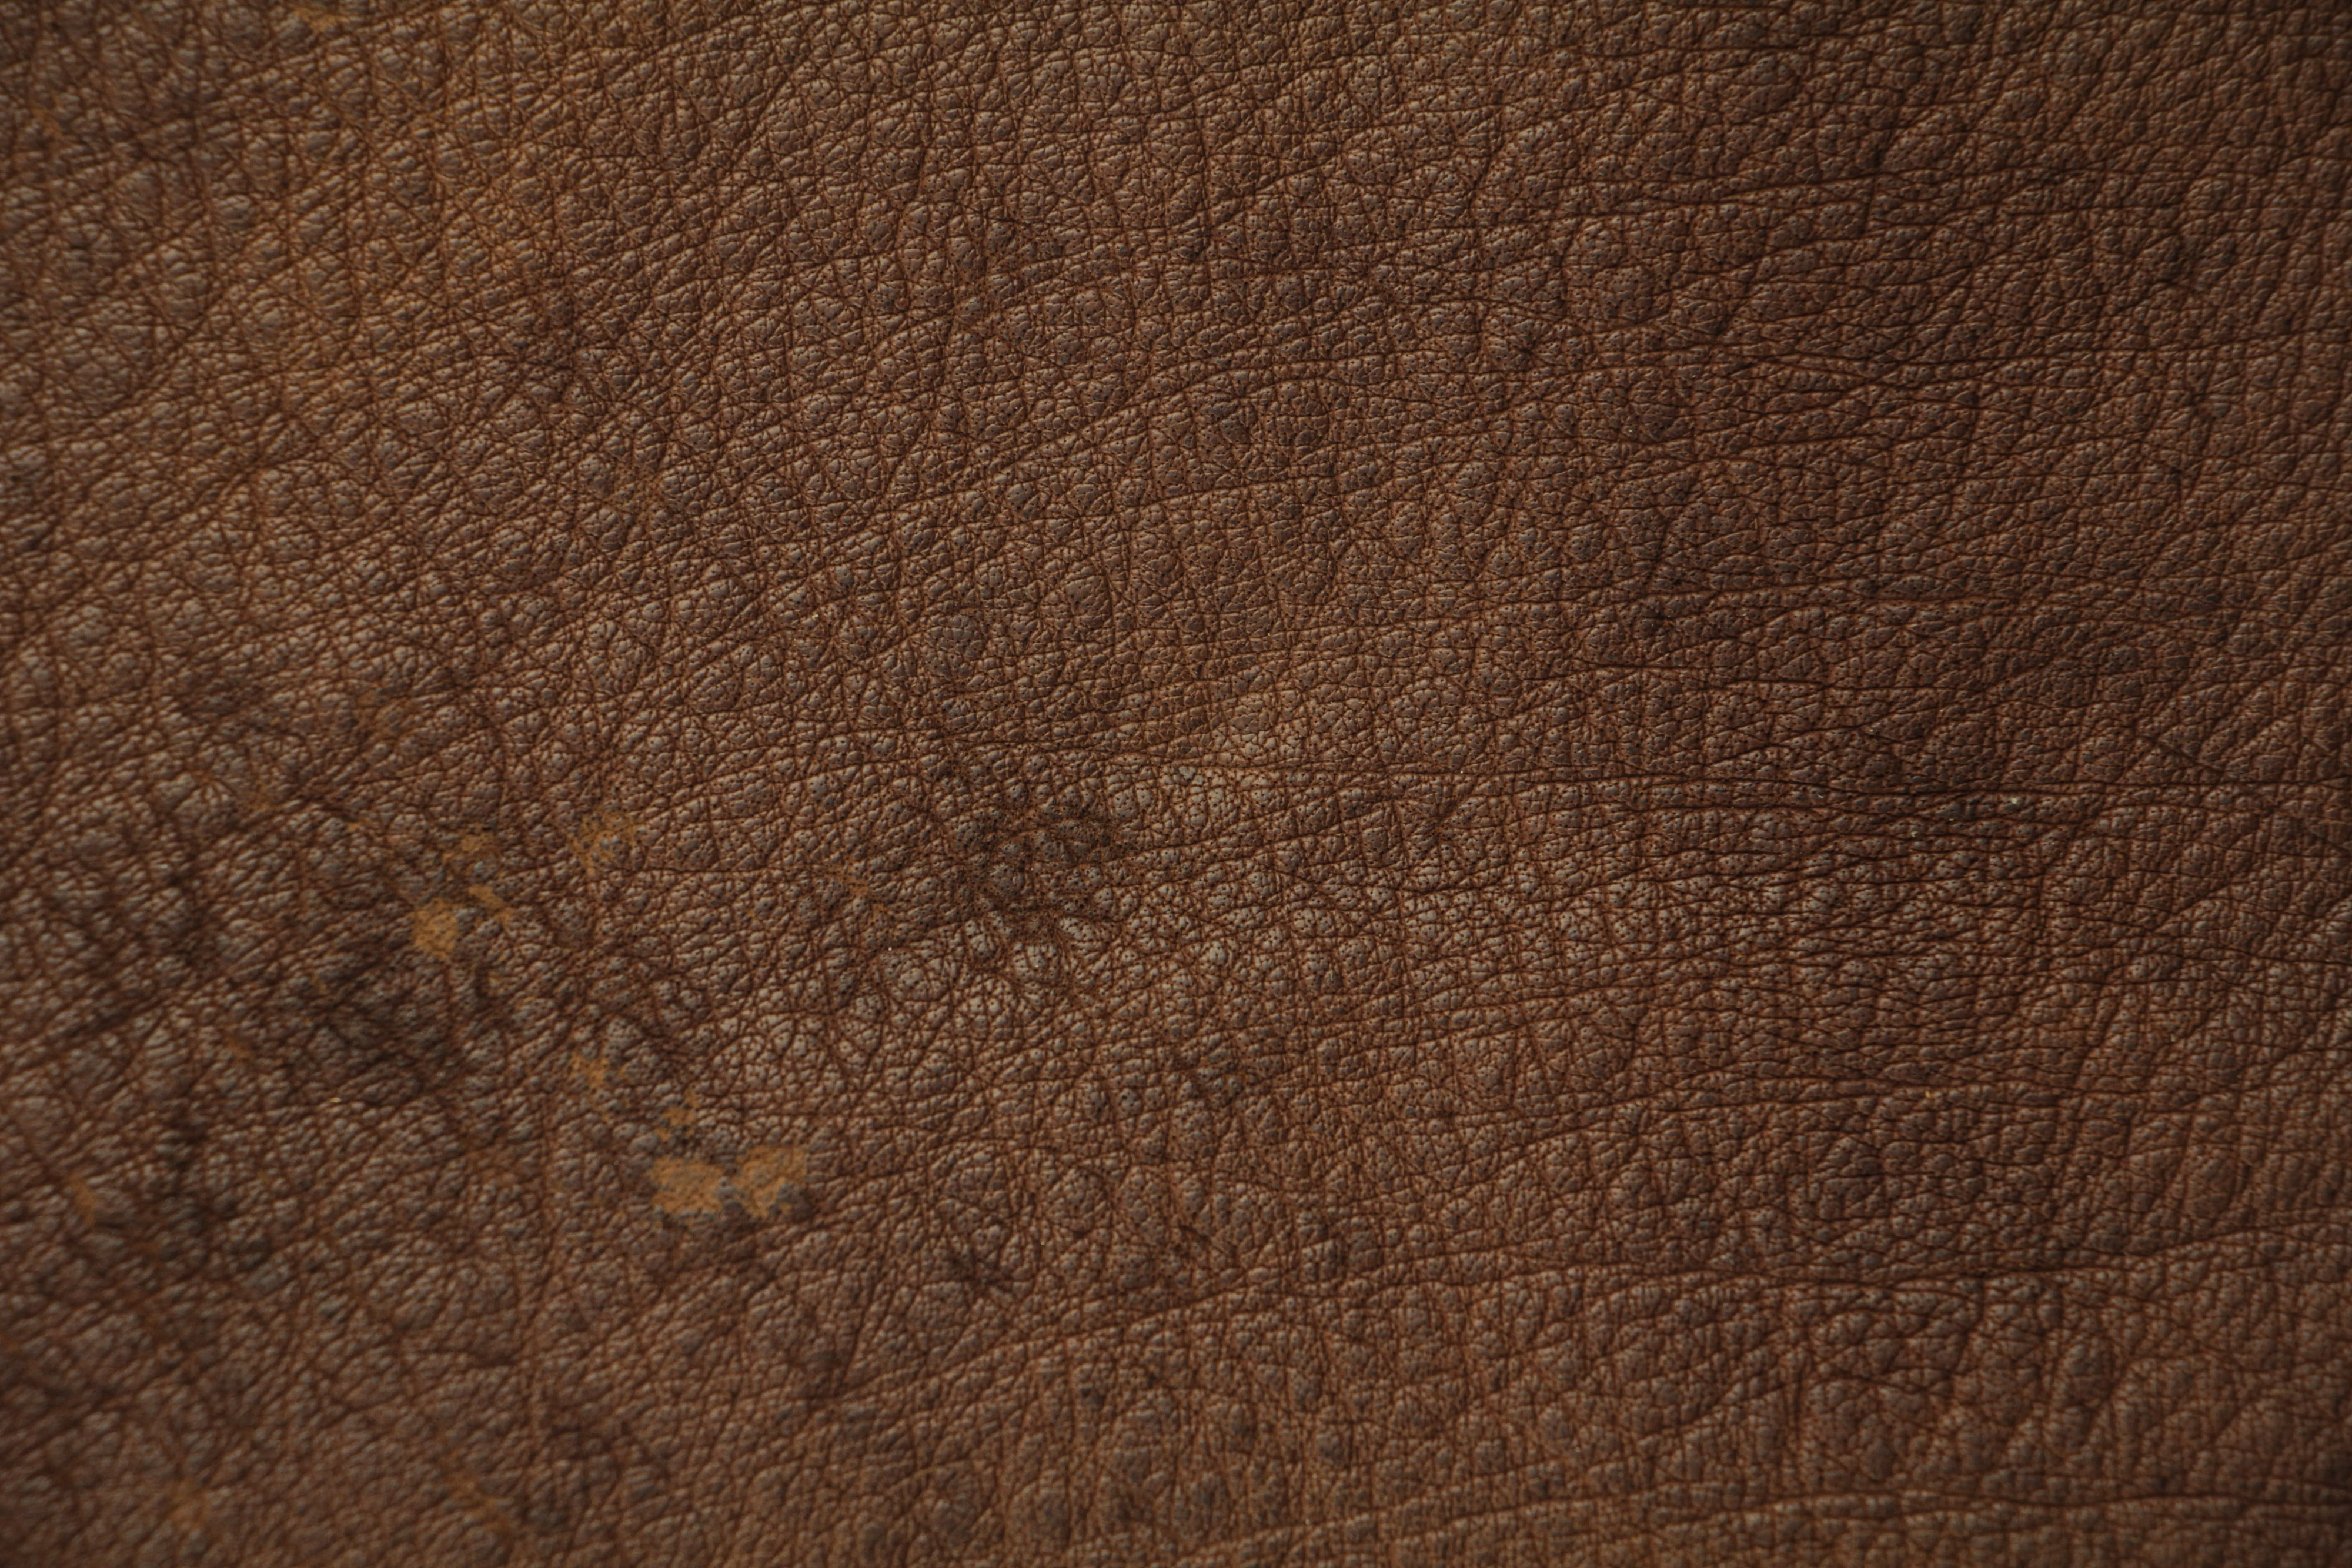 brown leather texture spotted high resolution wallpaper grunge stained